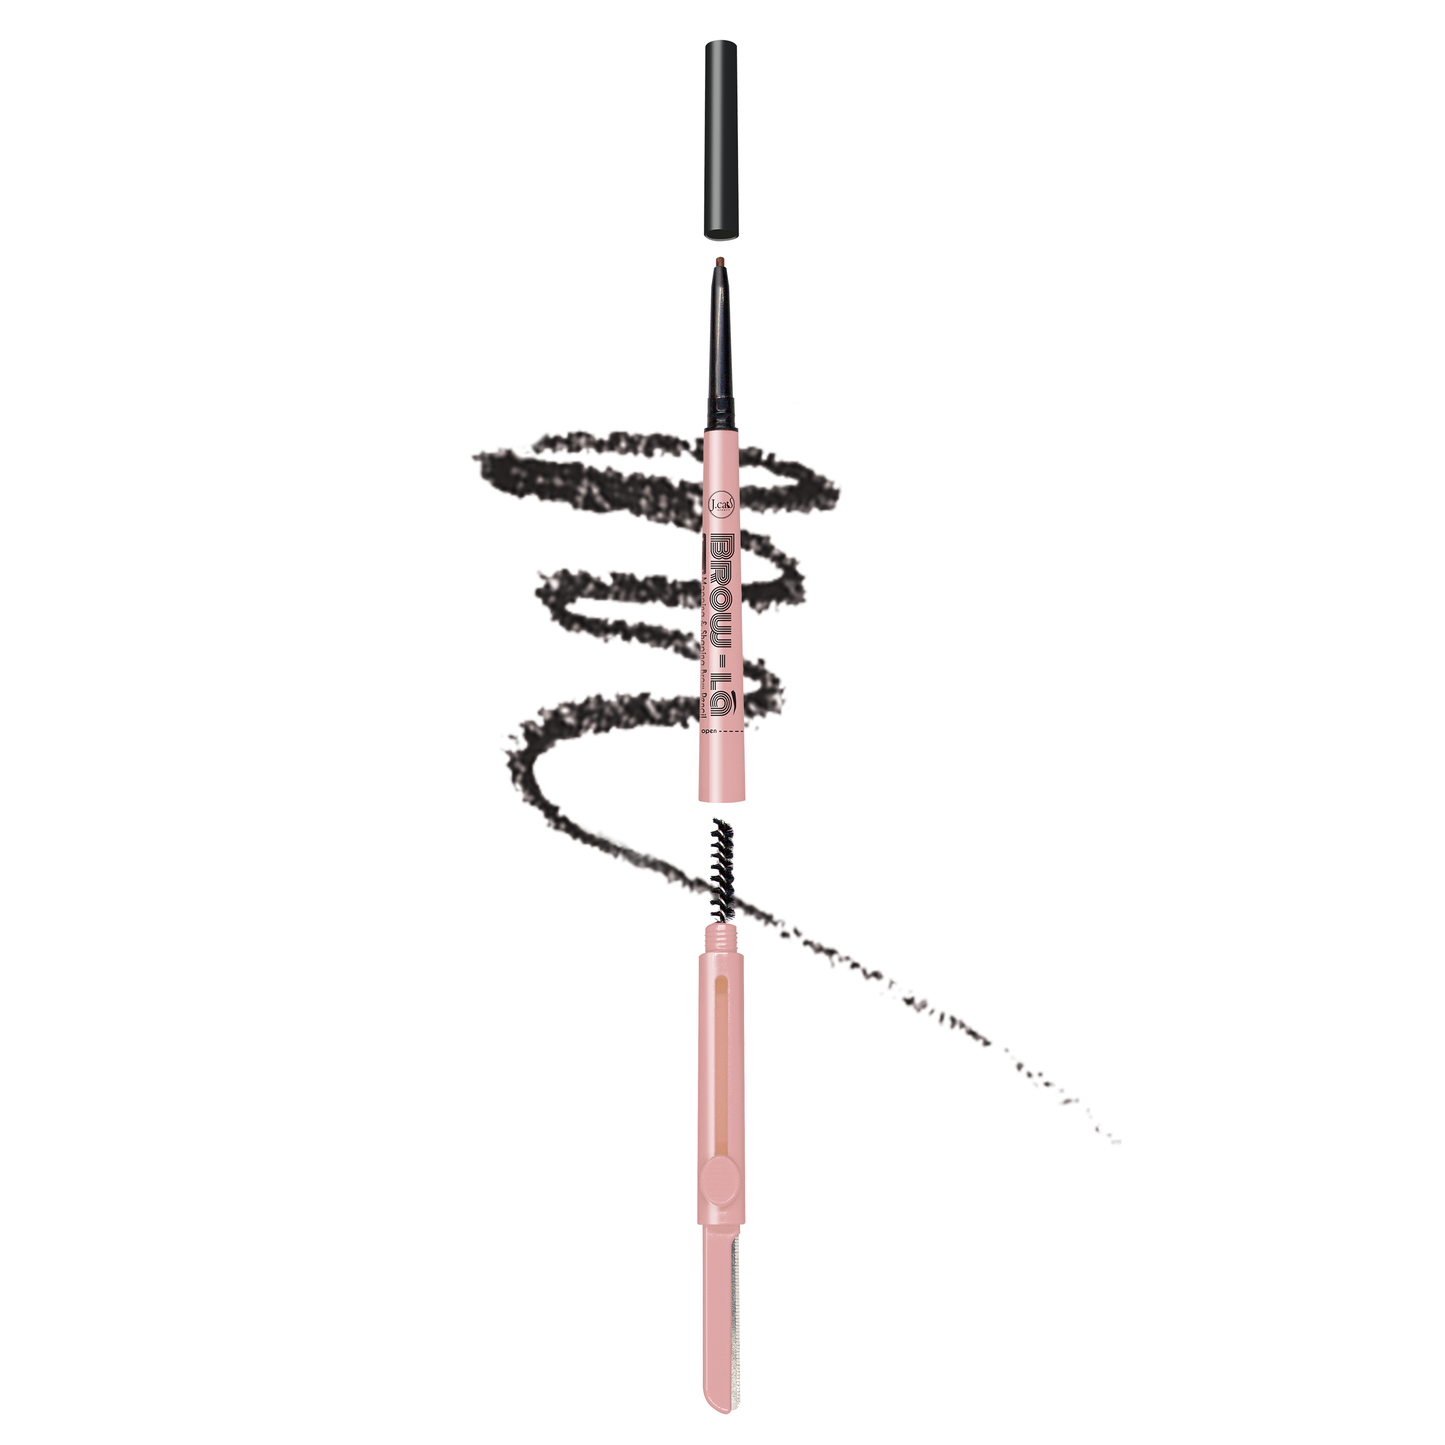 3 in 1 Mapping & Shaping Brow Pencil